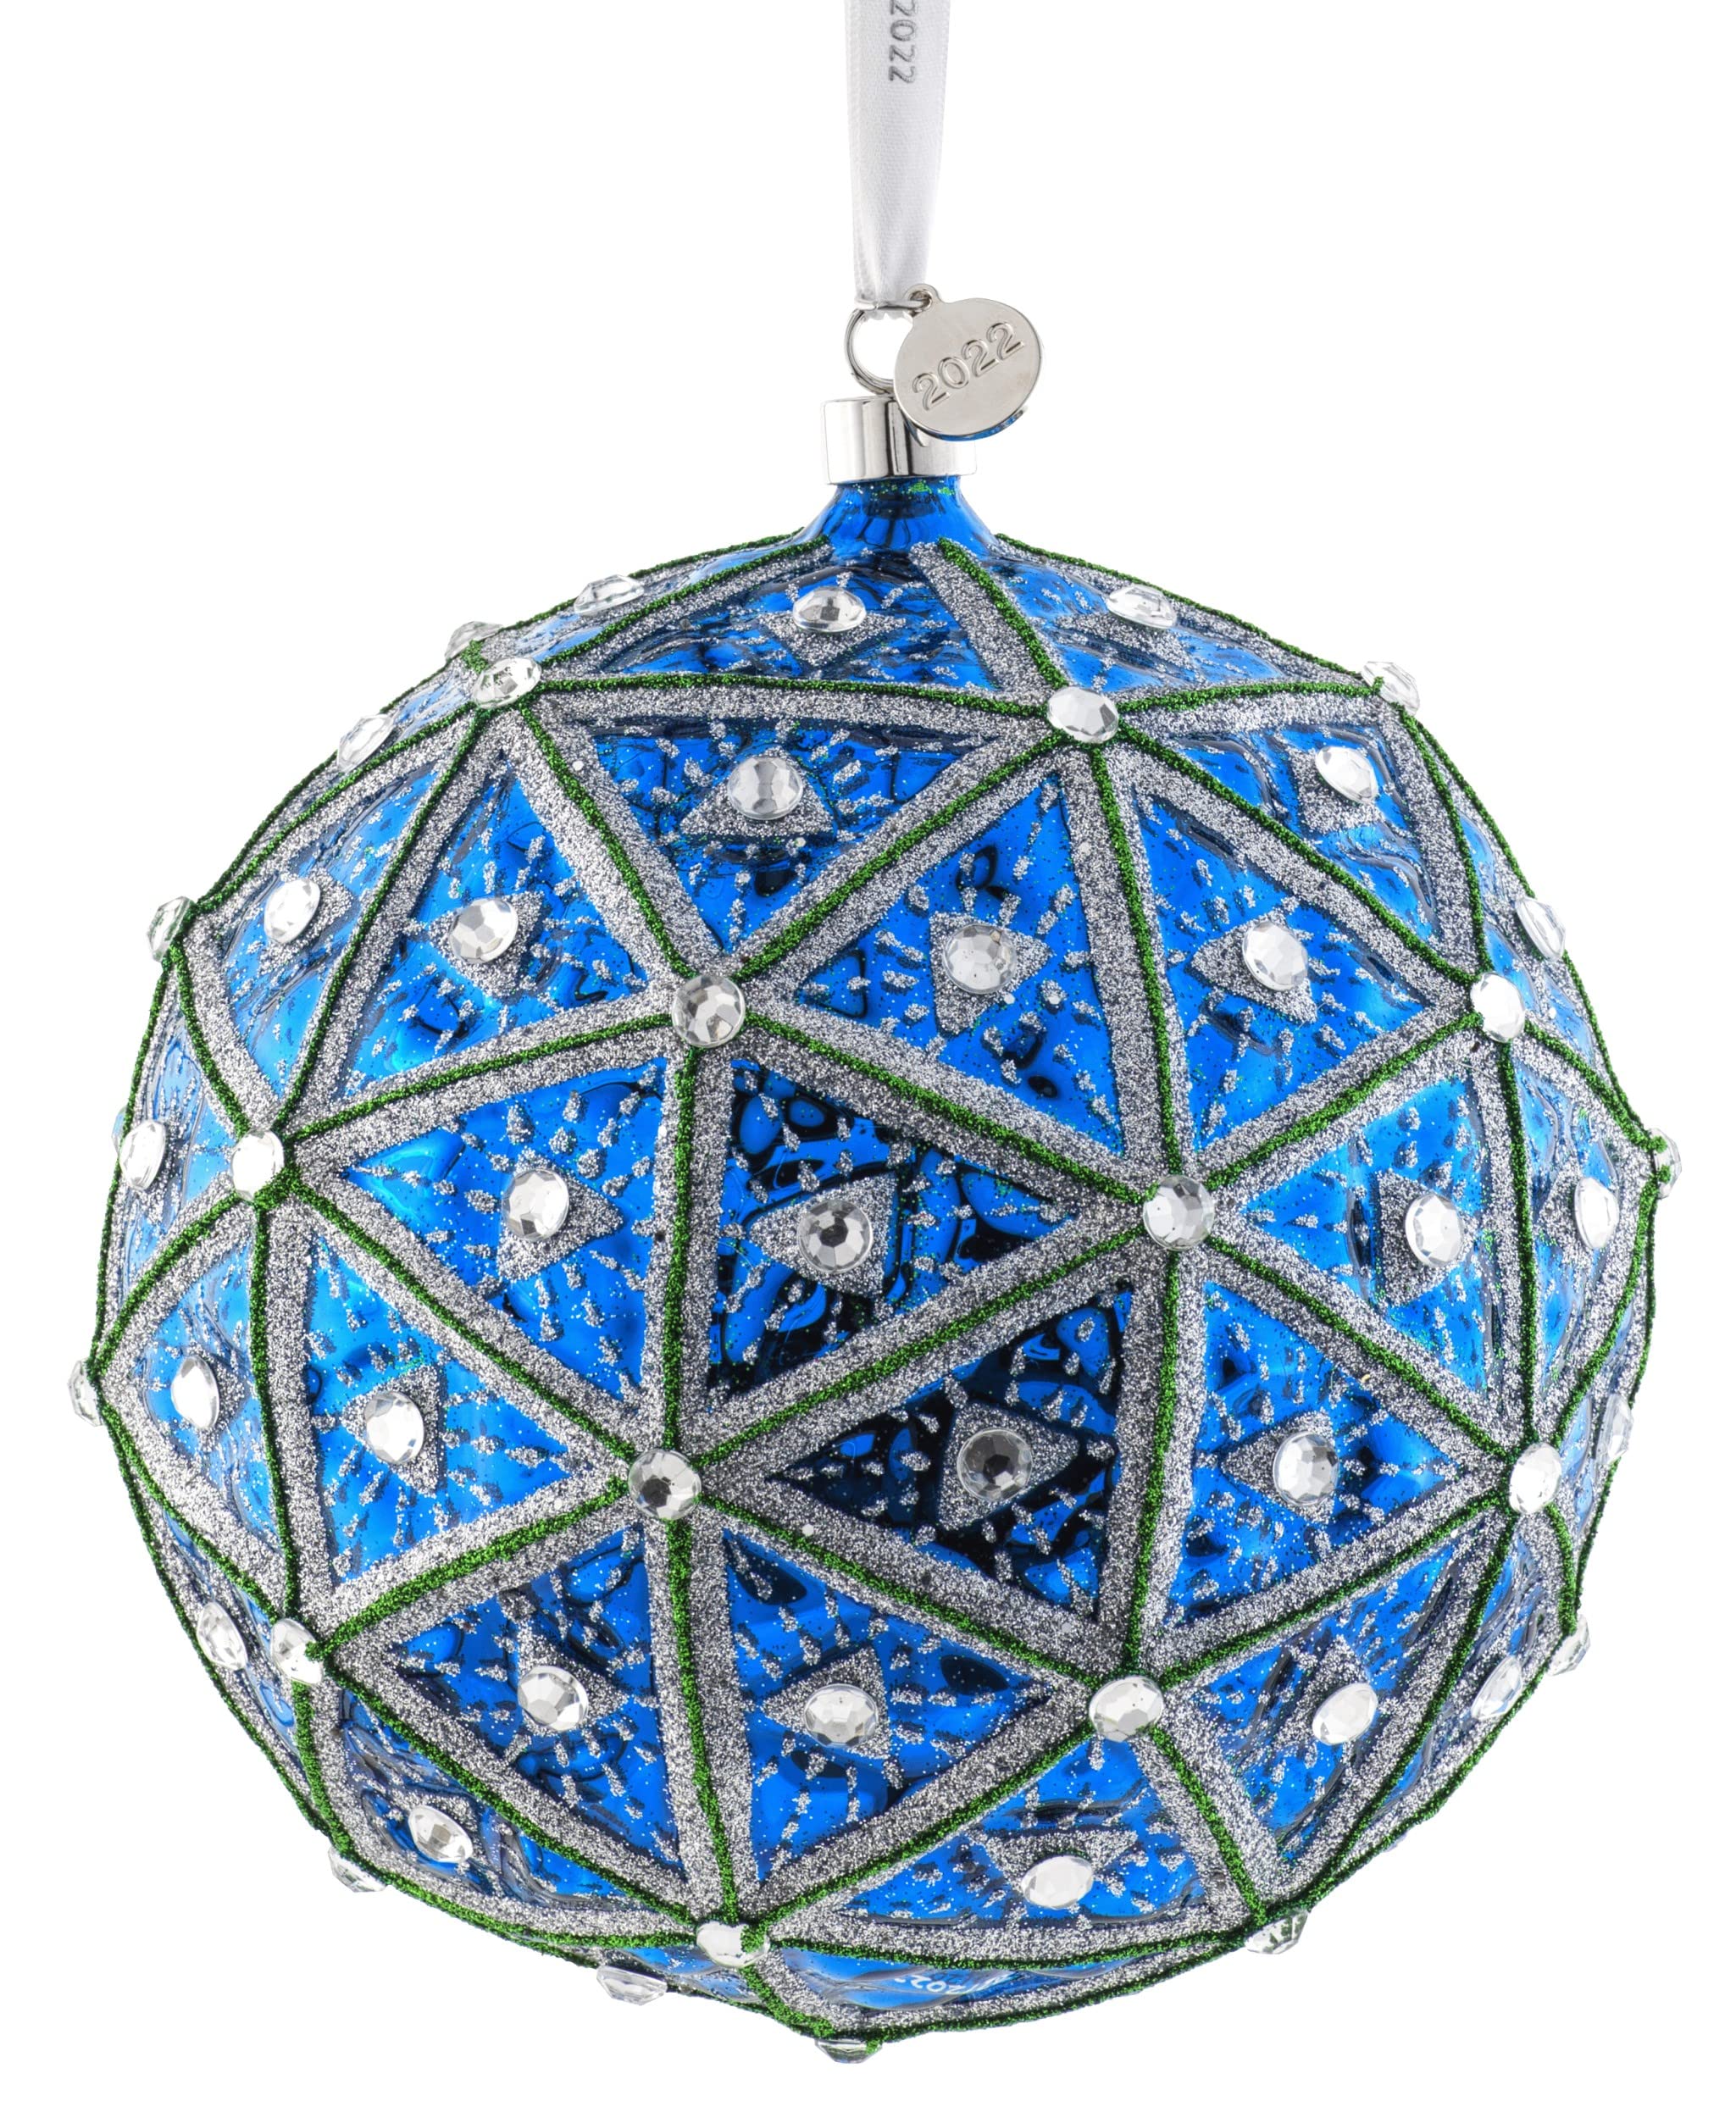 Waterford Times Square Wisdom Masterpiece Ball Ornament